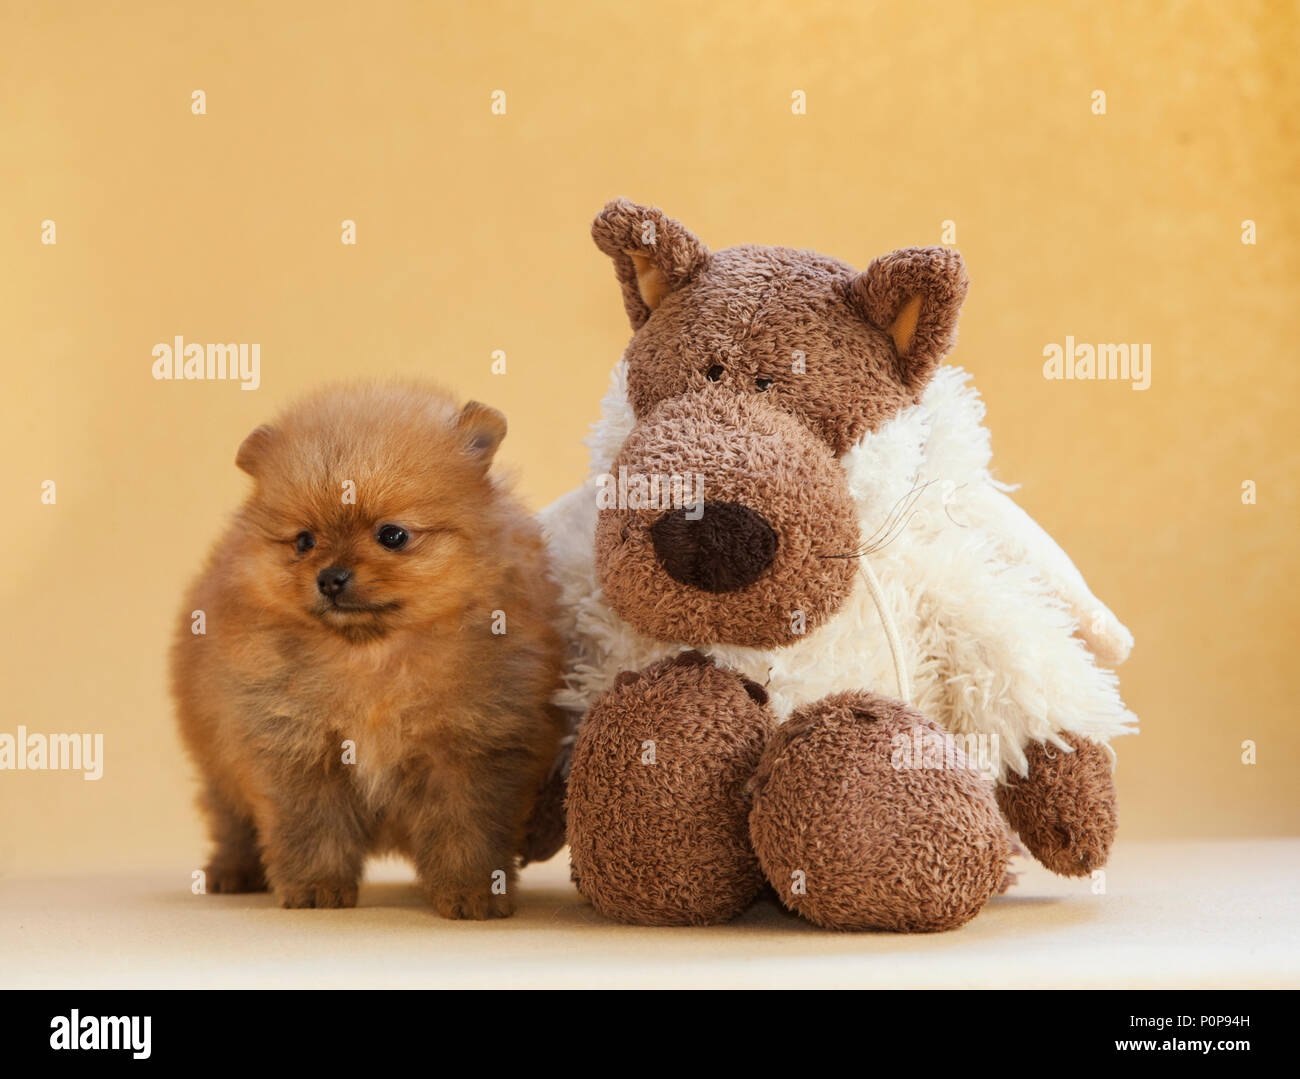 Pomeranian Puppy Dog And Teddy Bear Portrait In Studio With Beige Background P0P94H 